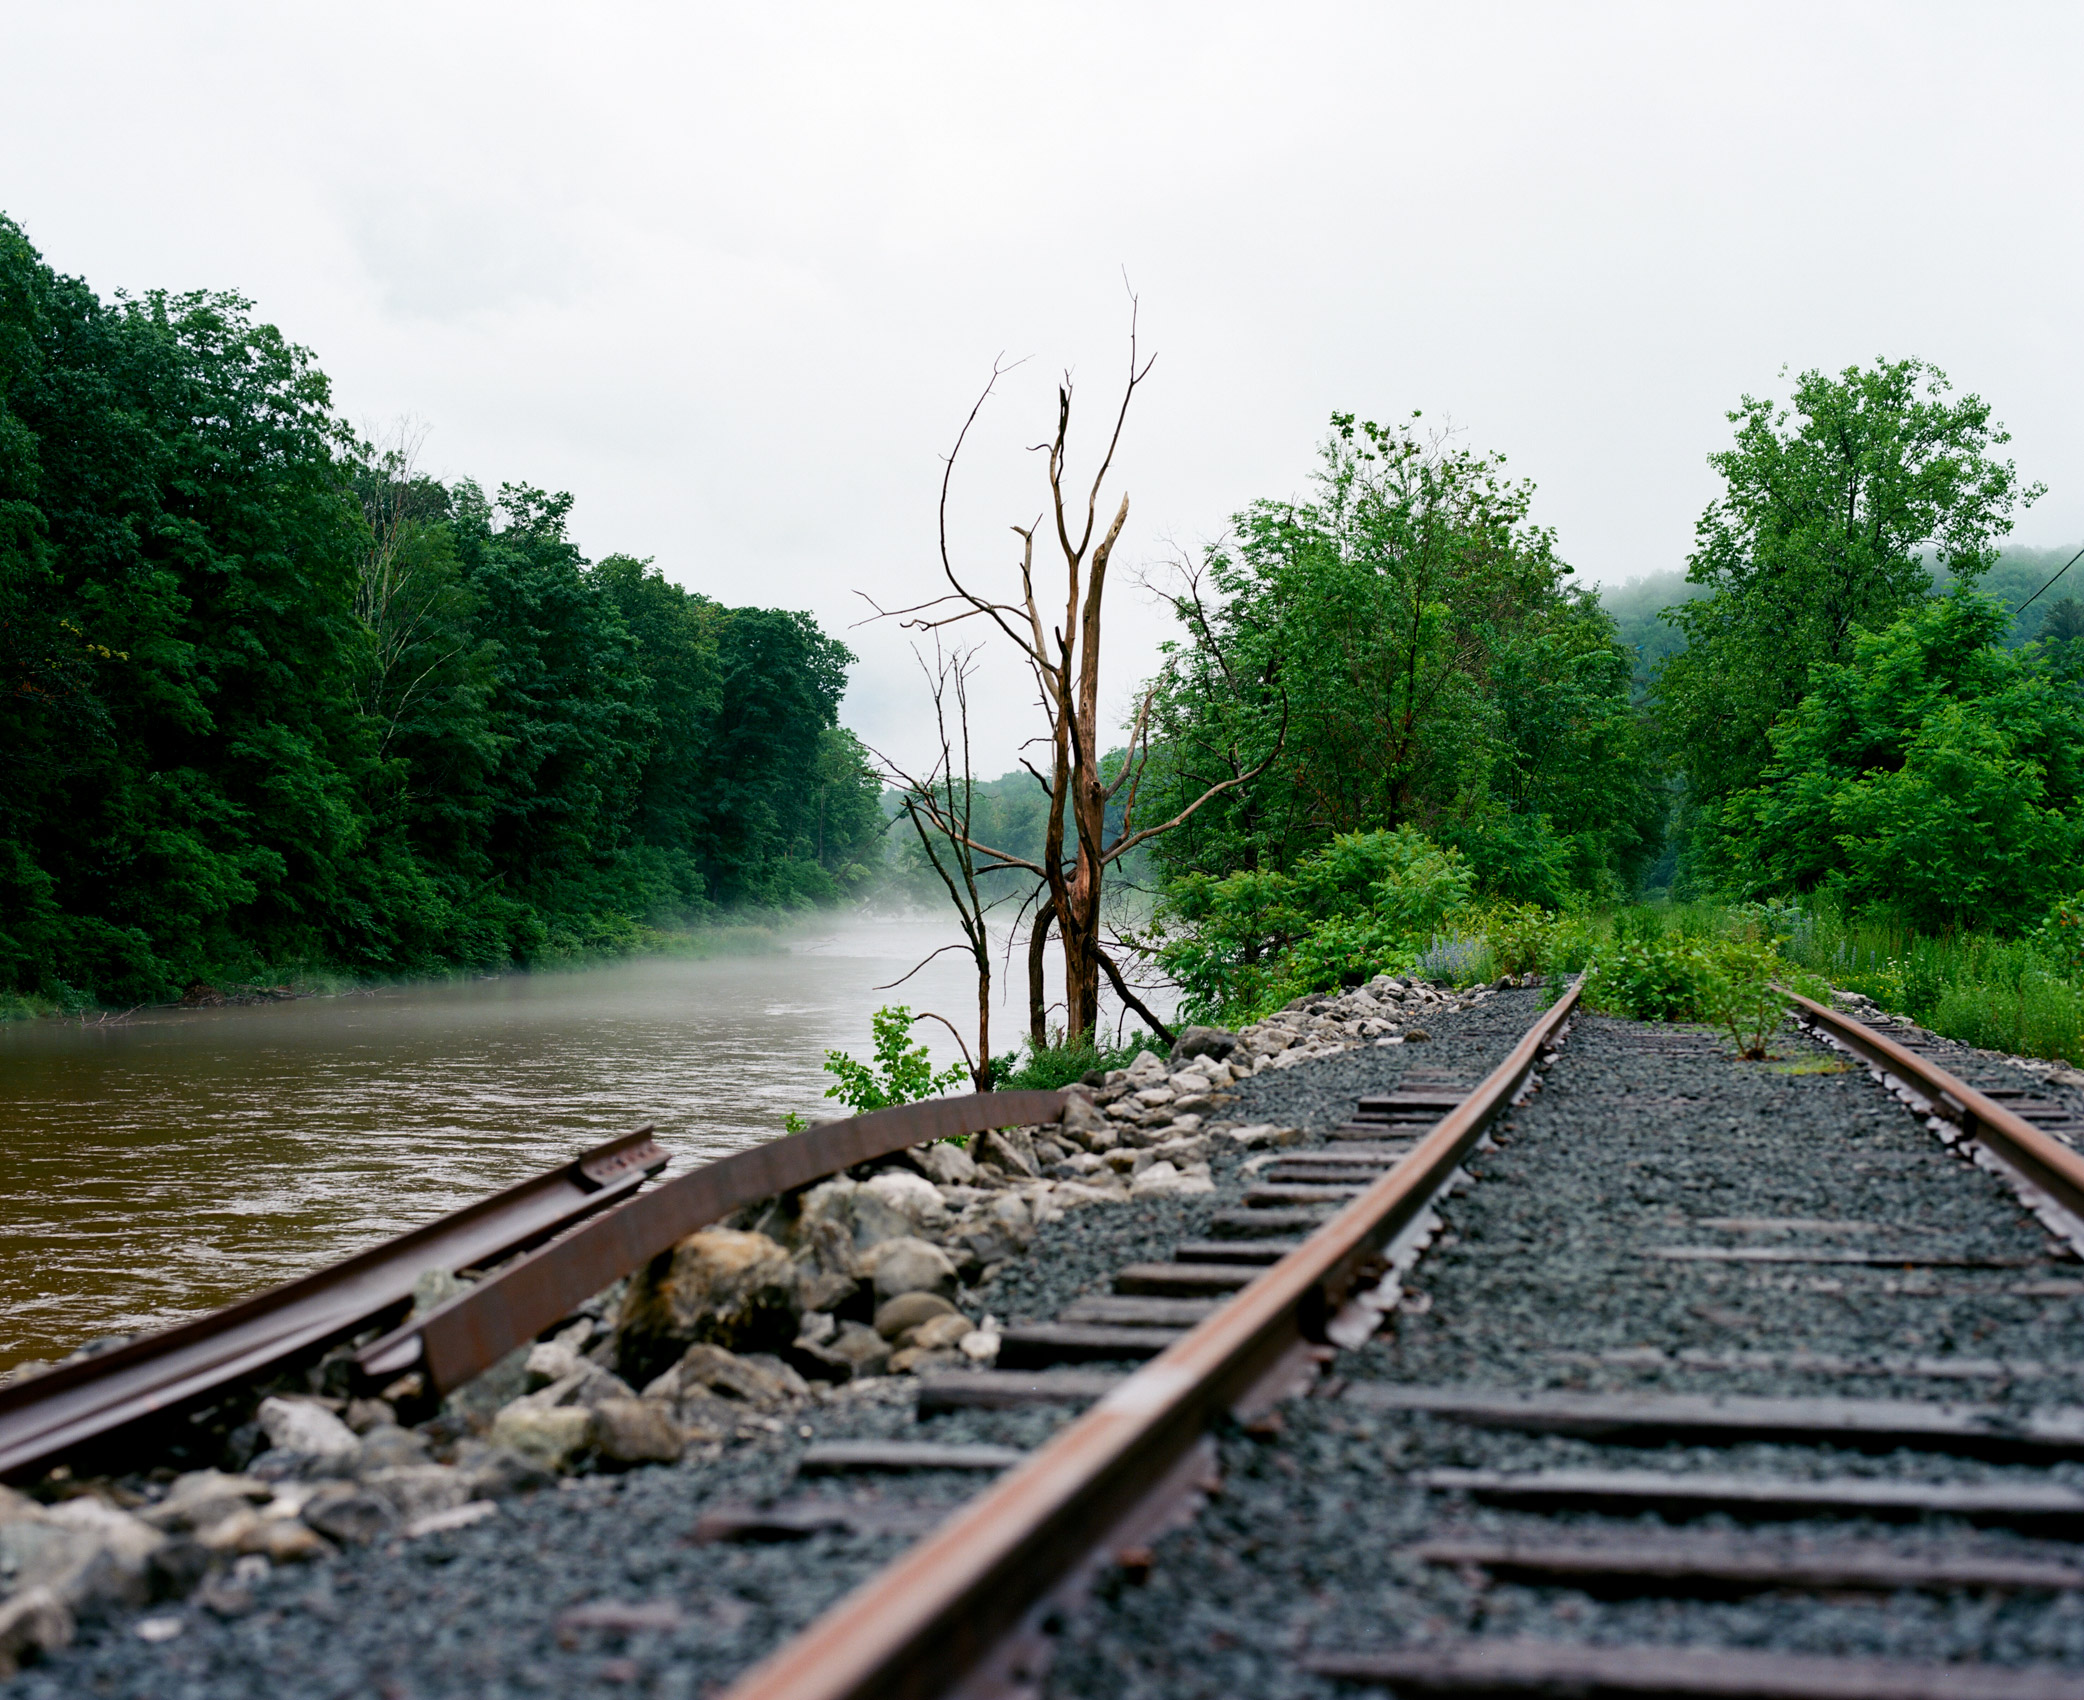 A-MEDIUM-FORMAT-PHOTO-OF-A-DISUSED-RAILWAY-LINE-IN-UPSTATE-NEW-YORK-ON-ROUTE-28-SHOT-ON-FILM-